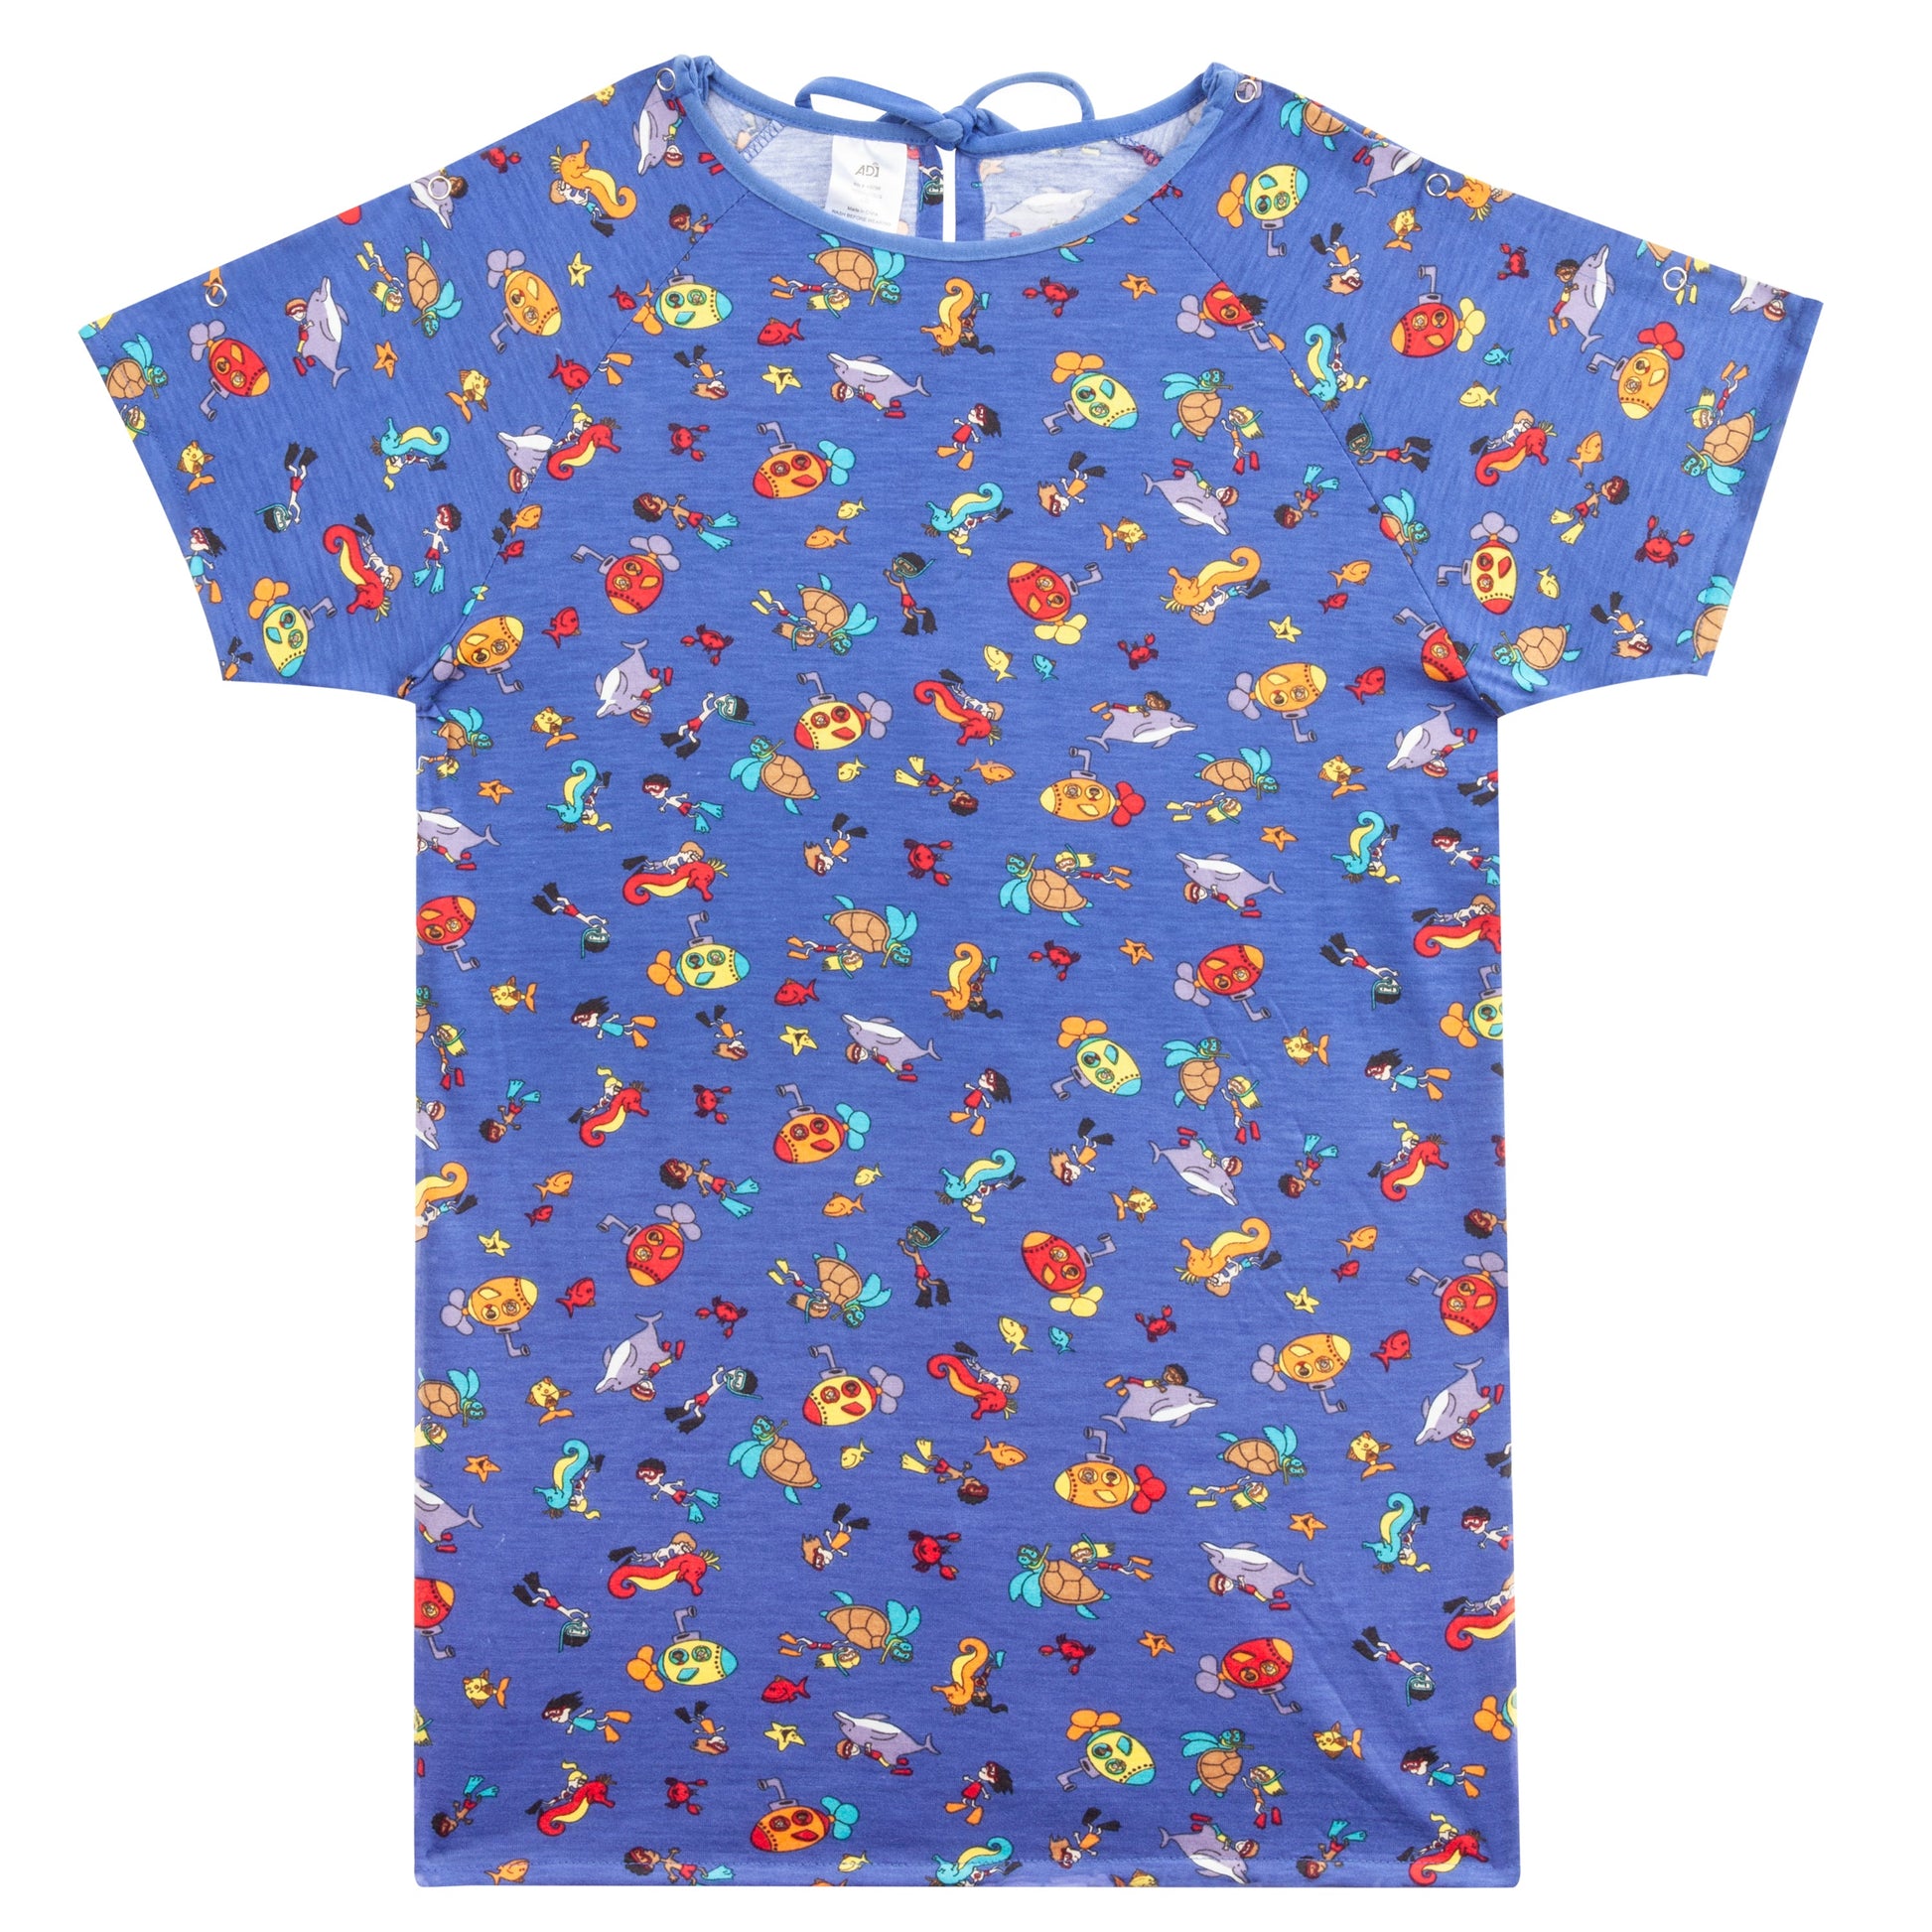 American Dawn | Large Royal Blue Pediatric Apparel | Pediatric Gown With Short Sleeves And 